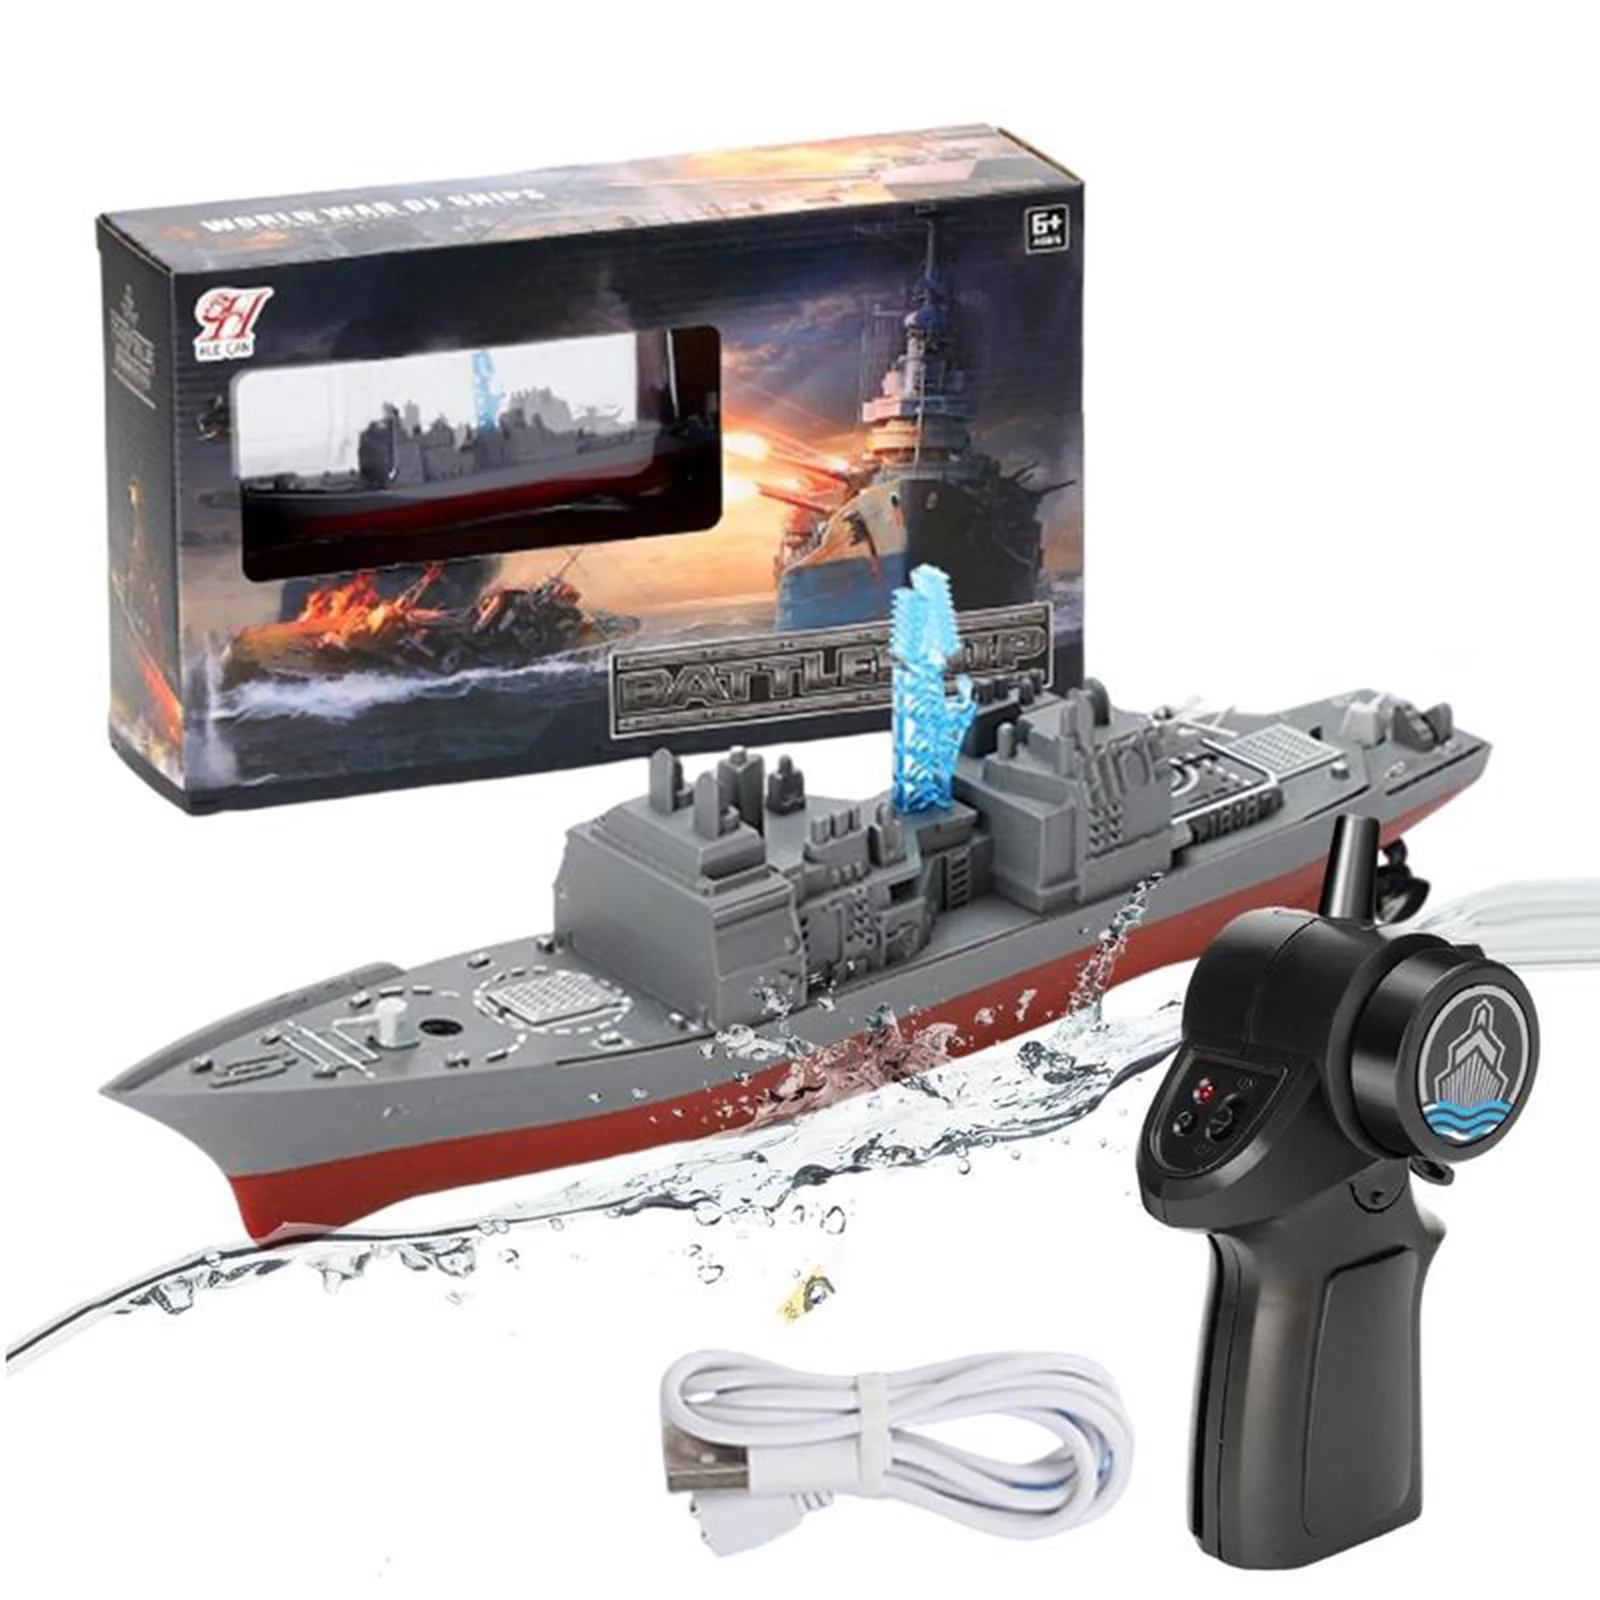 

RC Model Warship Speed Boat Toys Remote Control Warship 2.4GHz Flexible RC Ship Toy For Swimming Lake Pool Kids Electronic Gifts